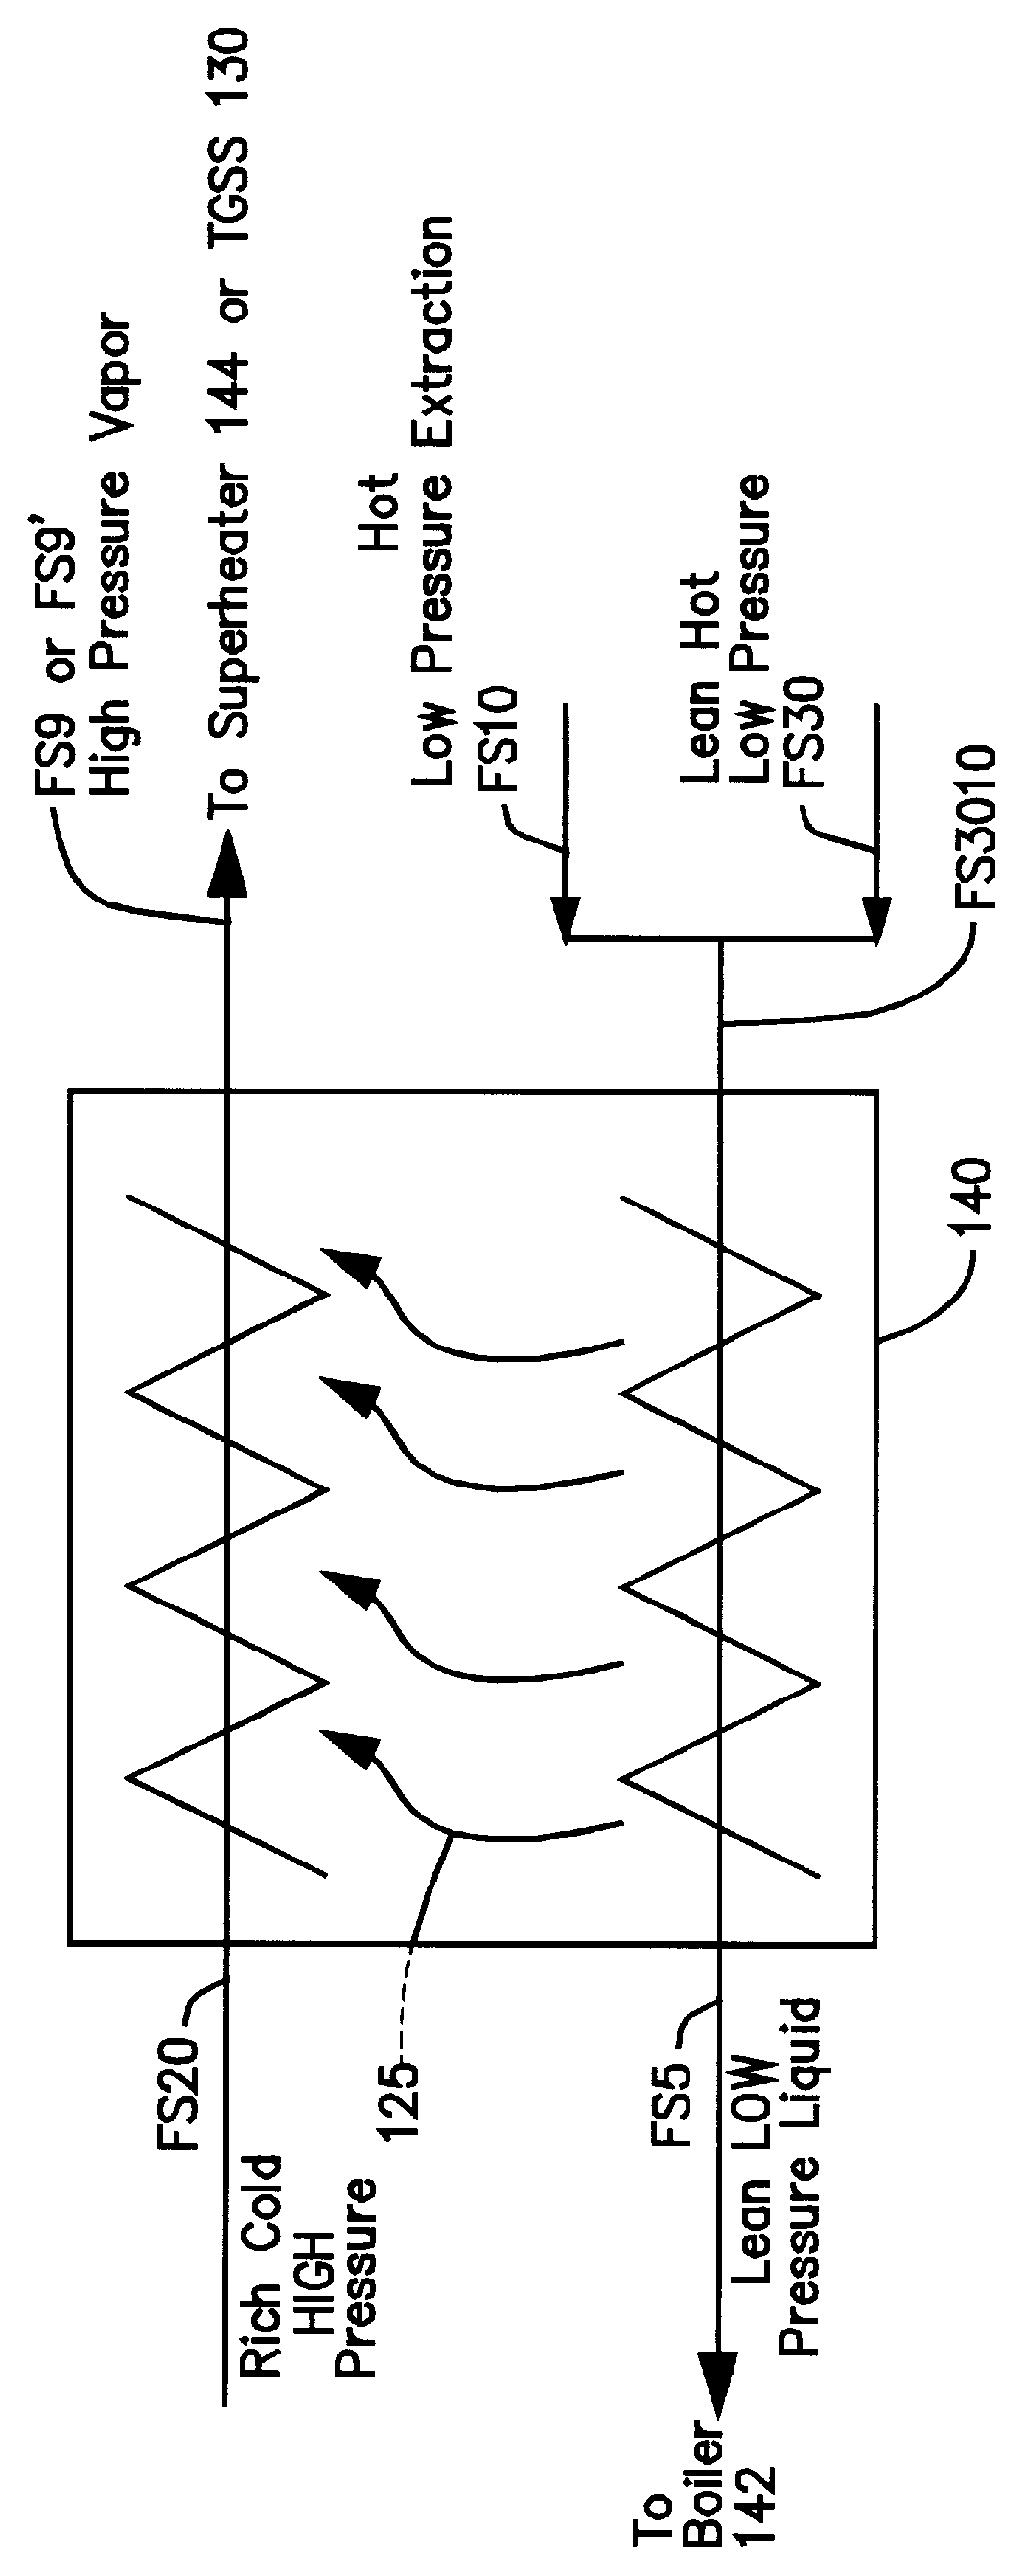 Technique for controlling superheated vapor requirements due to varying conditions in a Kalina cycle power generation system cross-reference to related applications